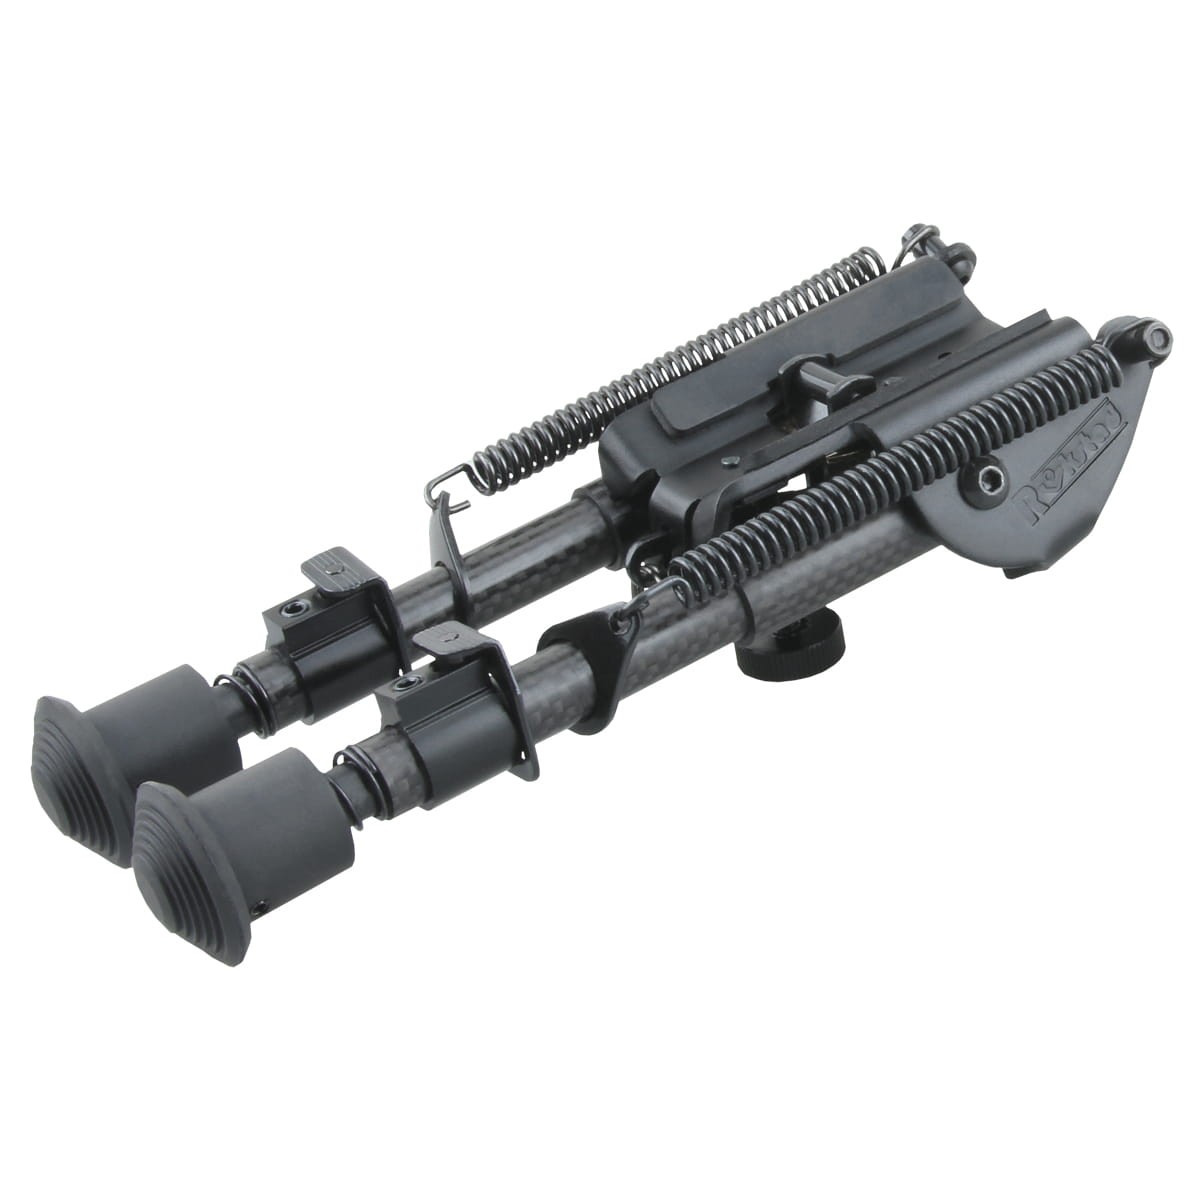 Details about   New Made Of Carbon Fiber 6" 9" Rifle Scope Bipod Shooting Accessories 